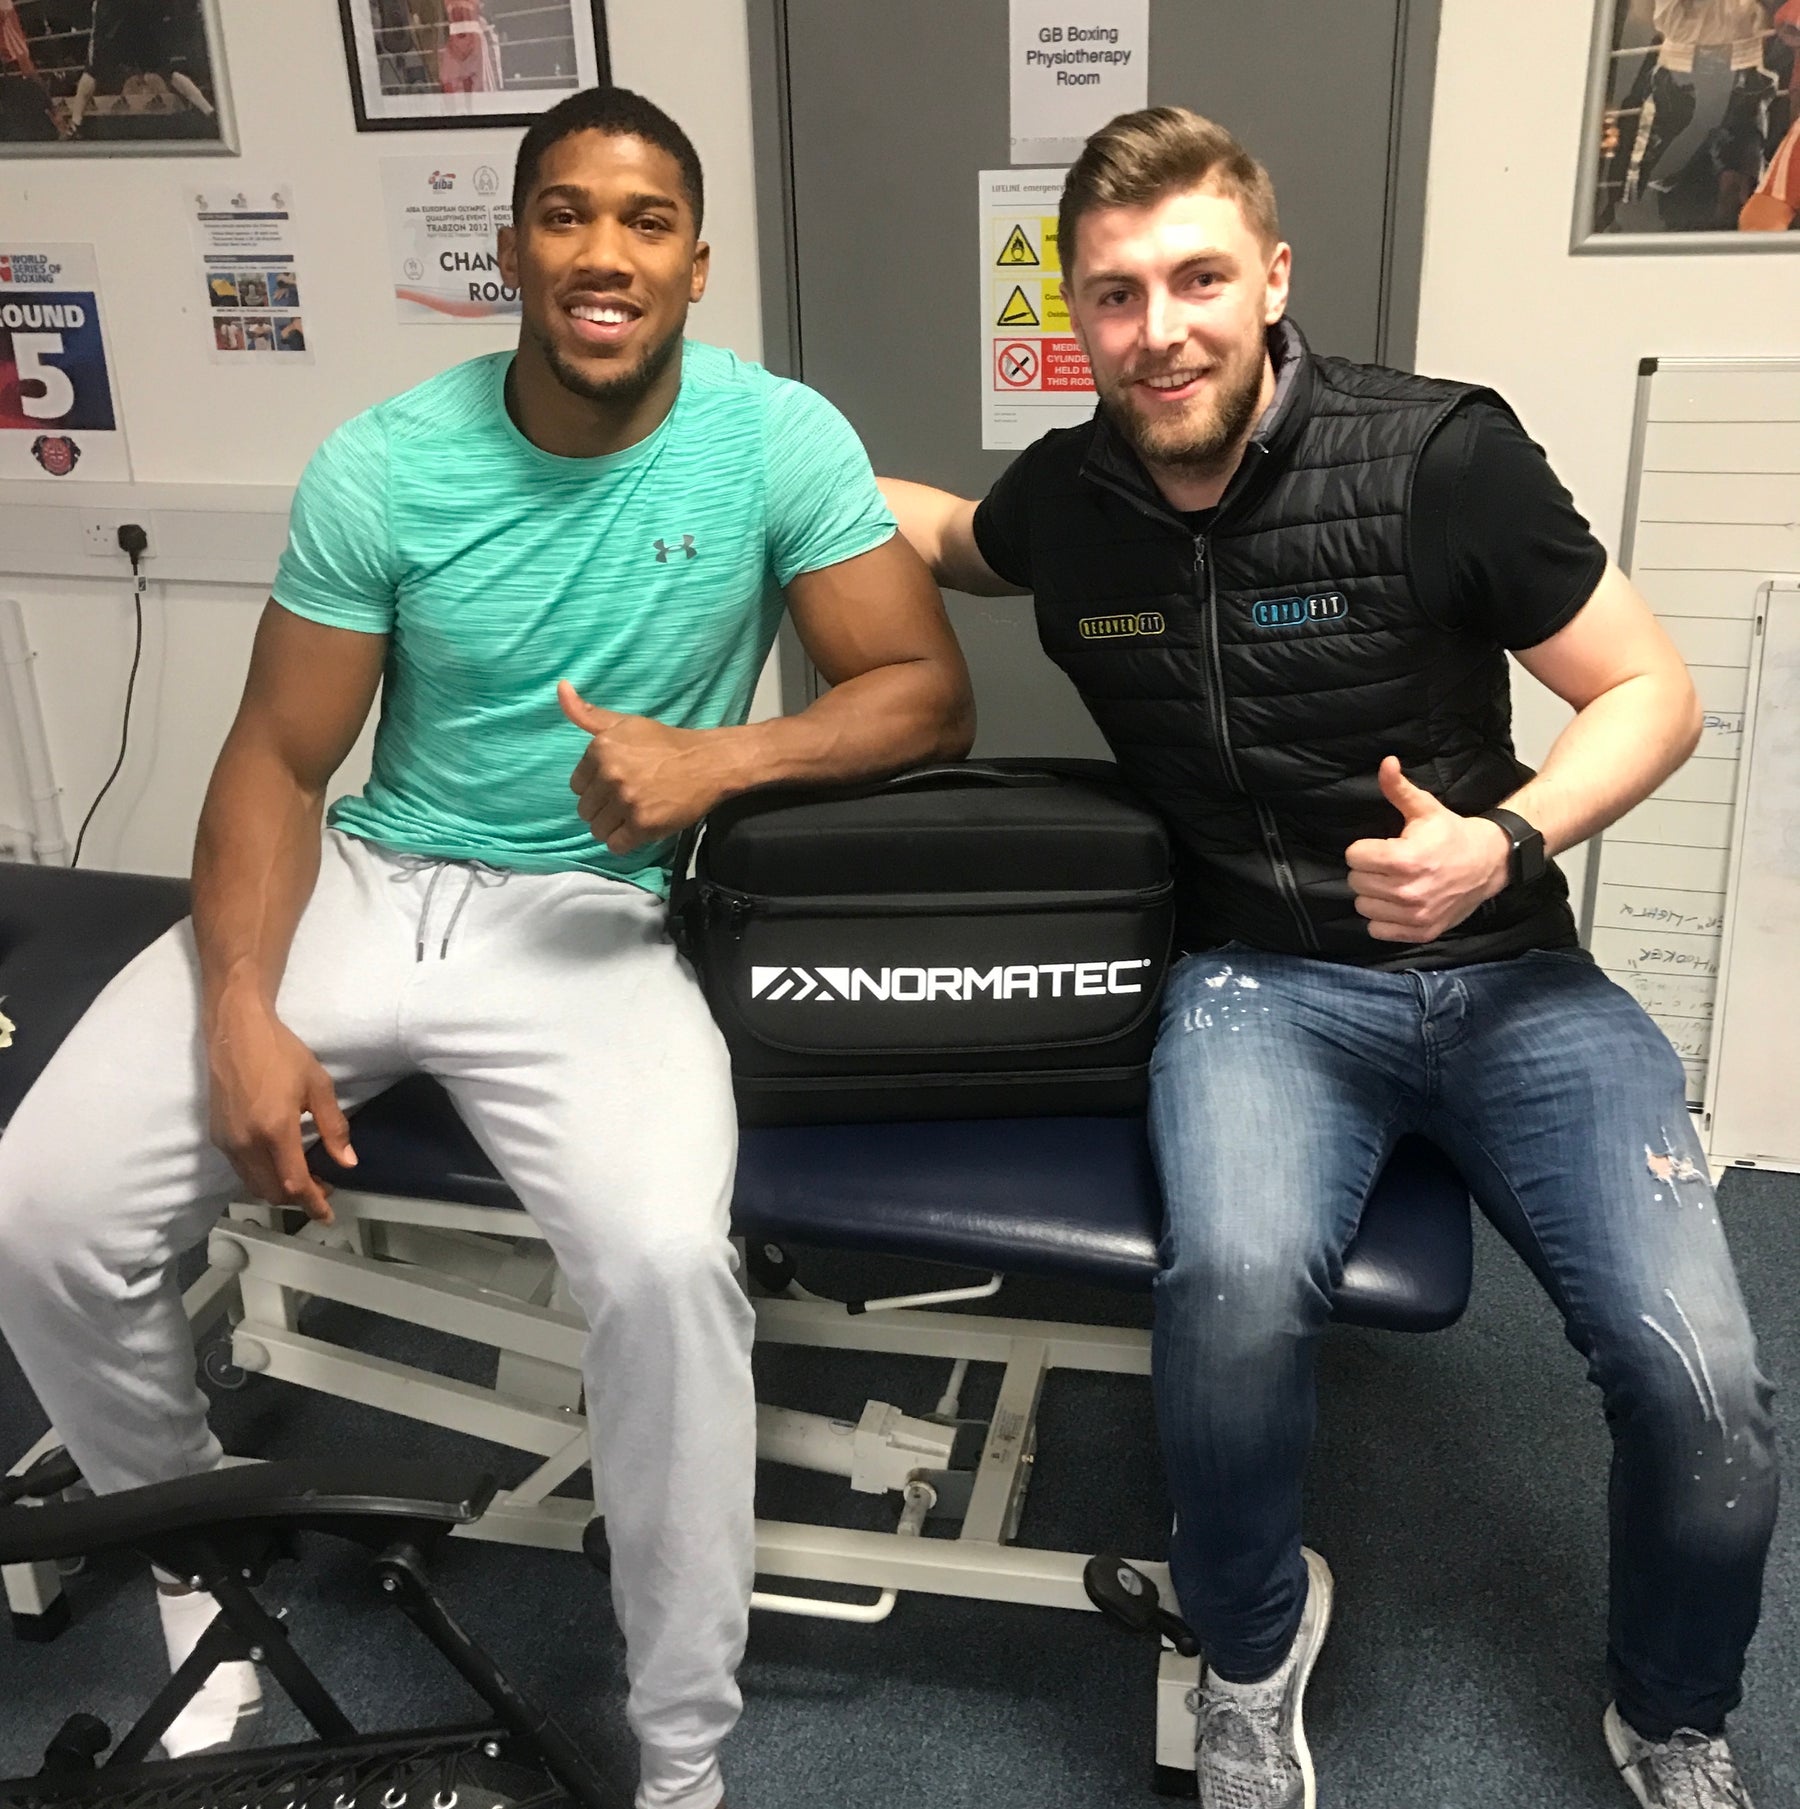 BAGGY TROUSERS NormaTec: Introducing the Michelin Man-style trousers that Anthony Joshua, Gareth Bale and John Terry use to aid muscle recovery